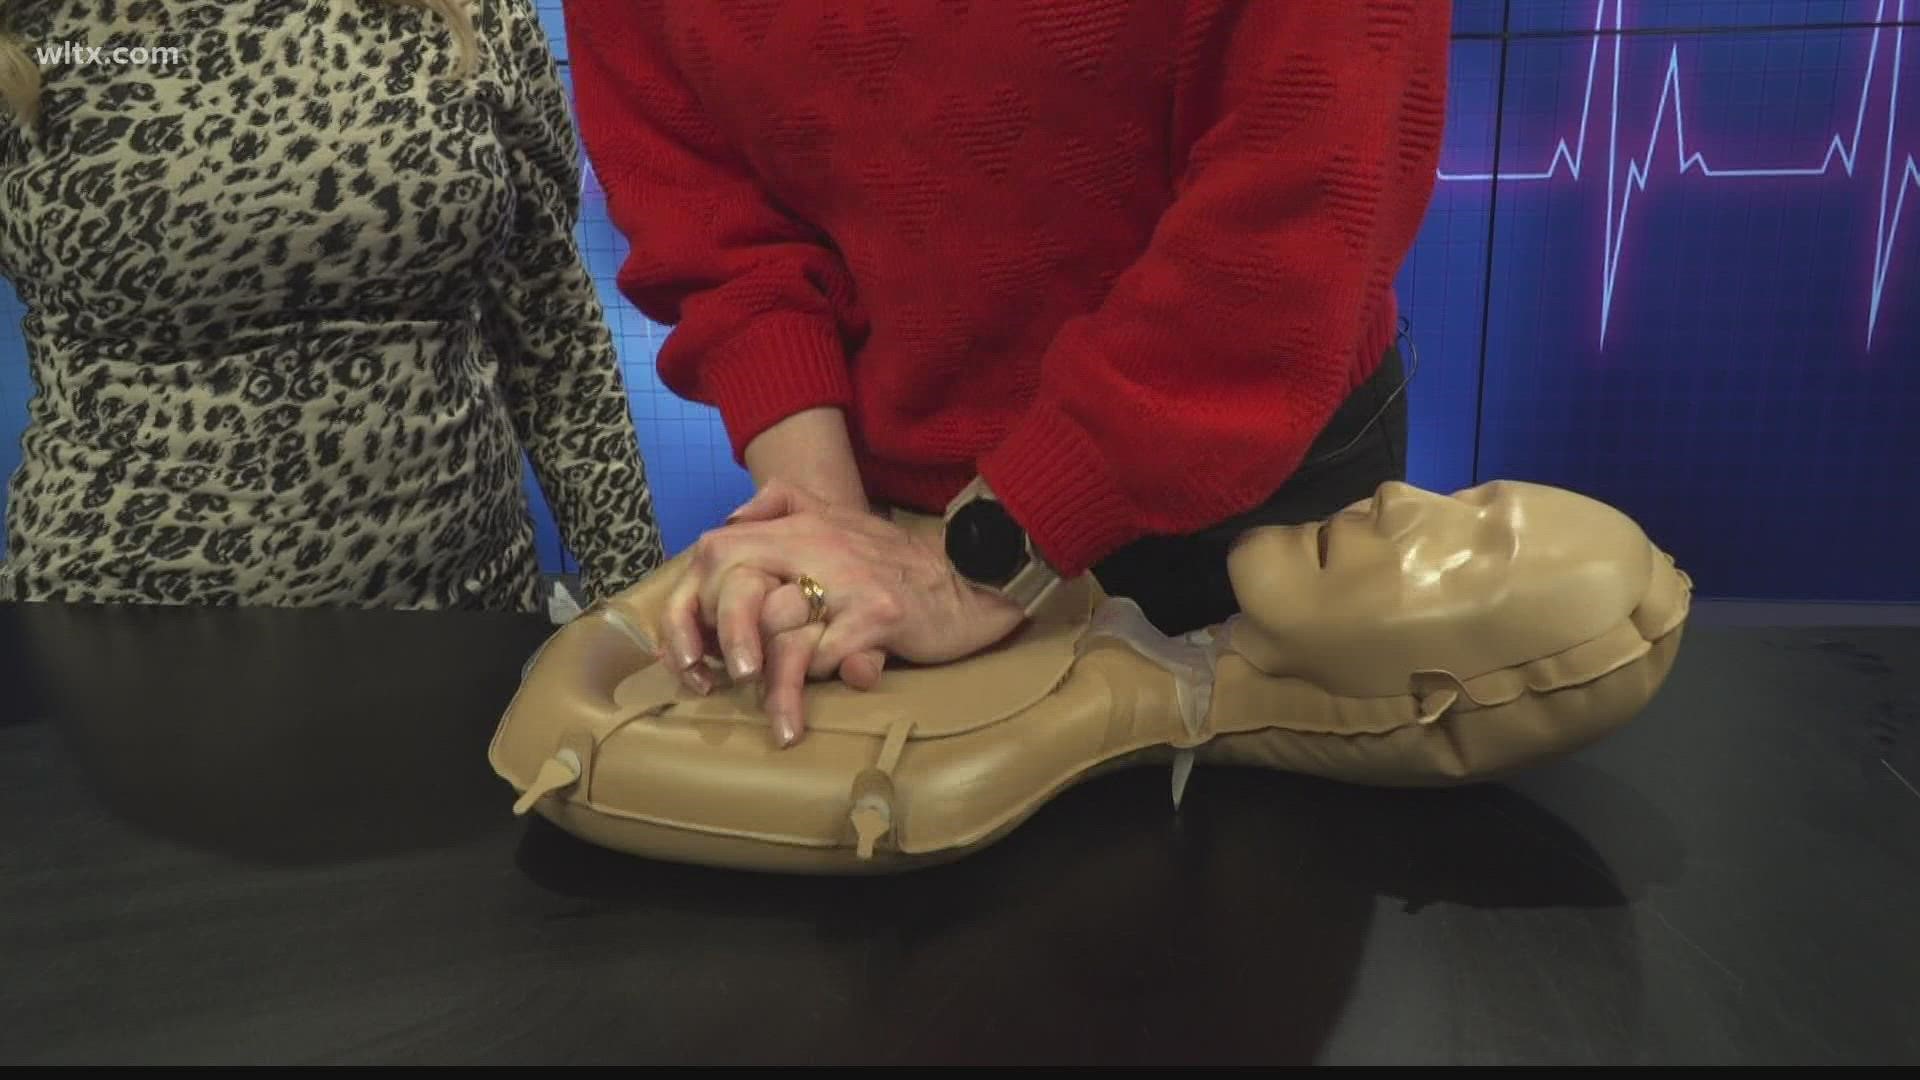 News19's Andrea Mock speaks with a nurse from Prisma Health to show the proper way to perform CPR in an emergency situation.